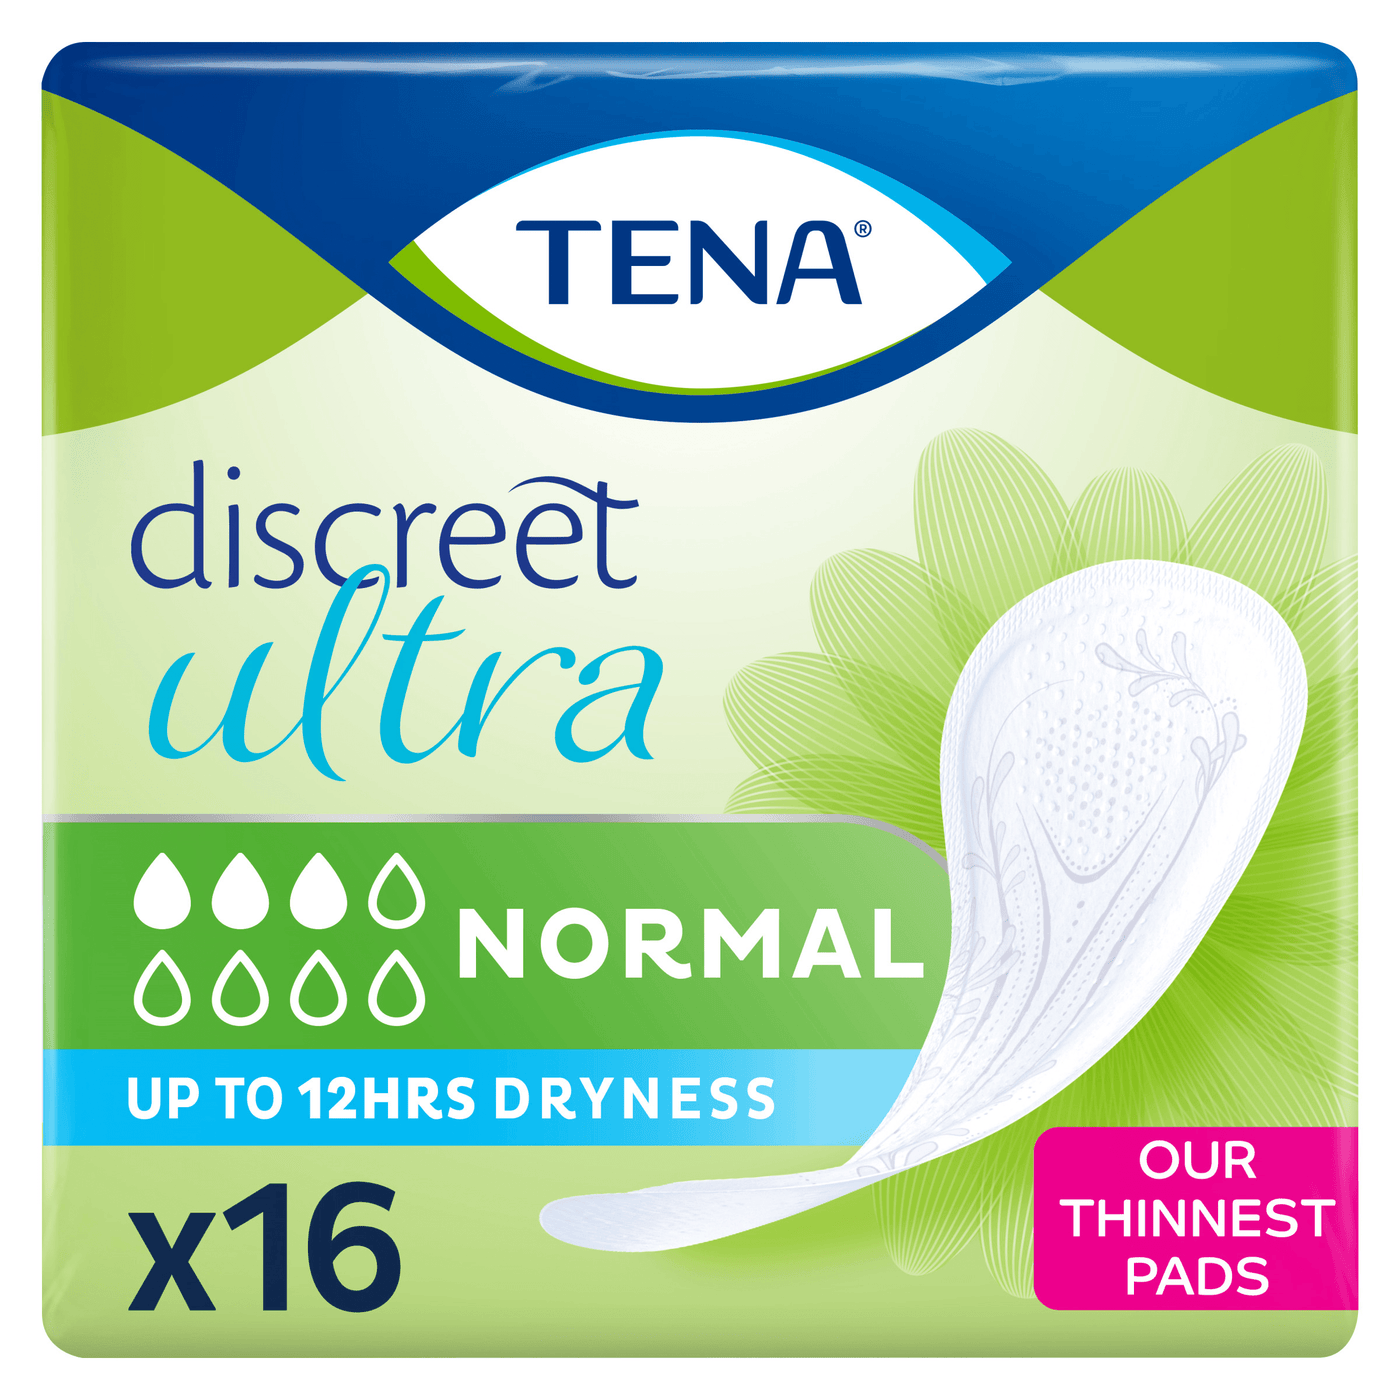 TENA Discreet Ultra Normal Incontinence Pads 16 Pack